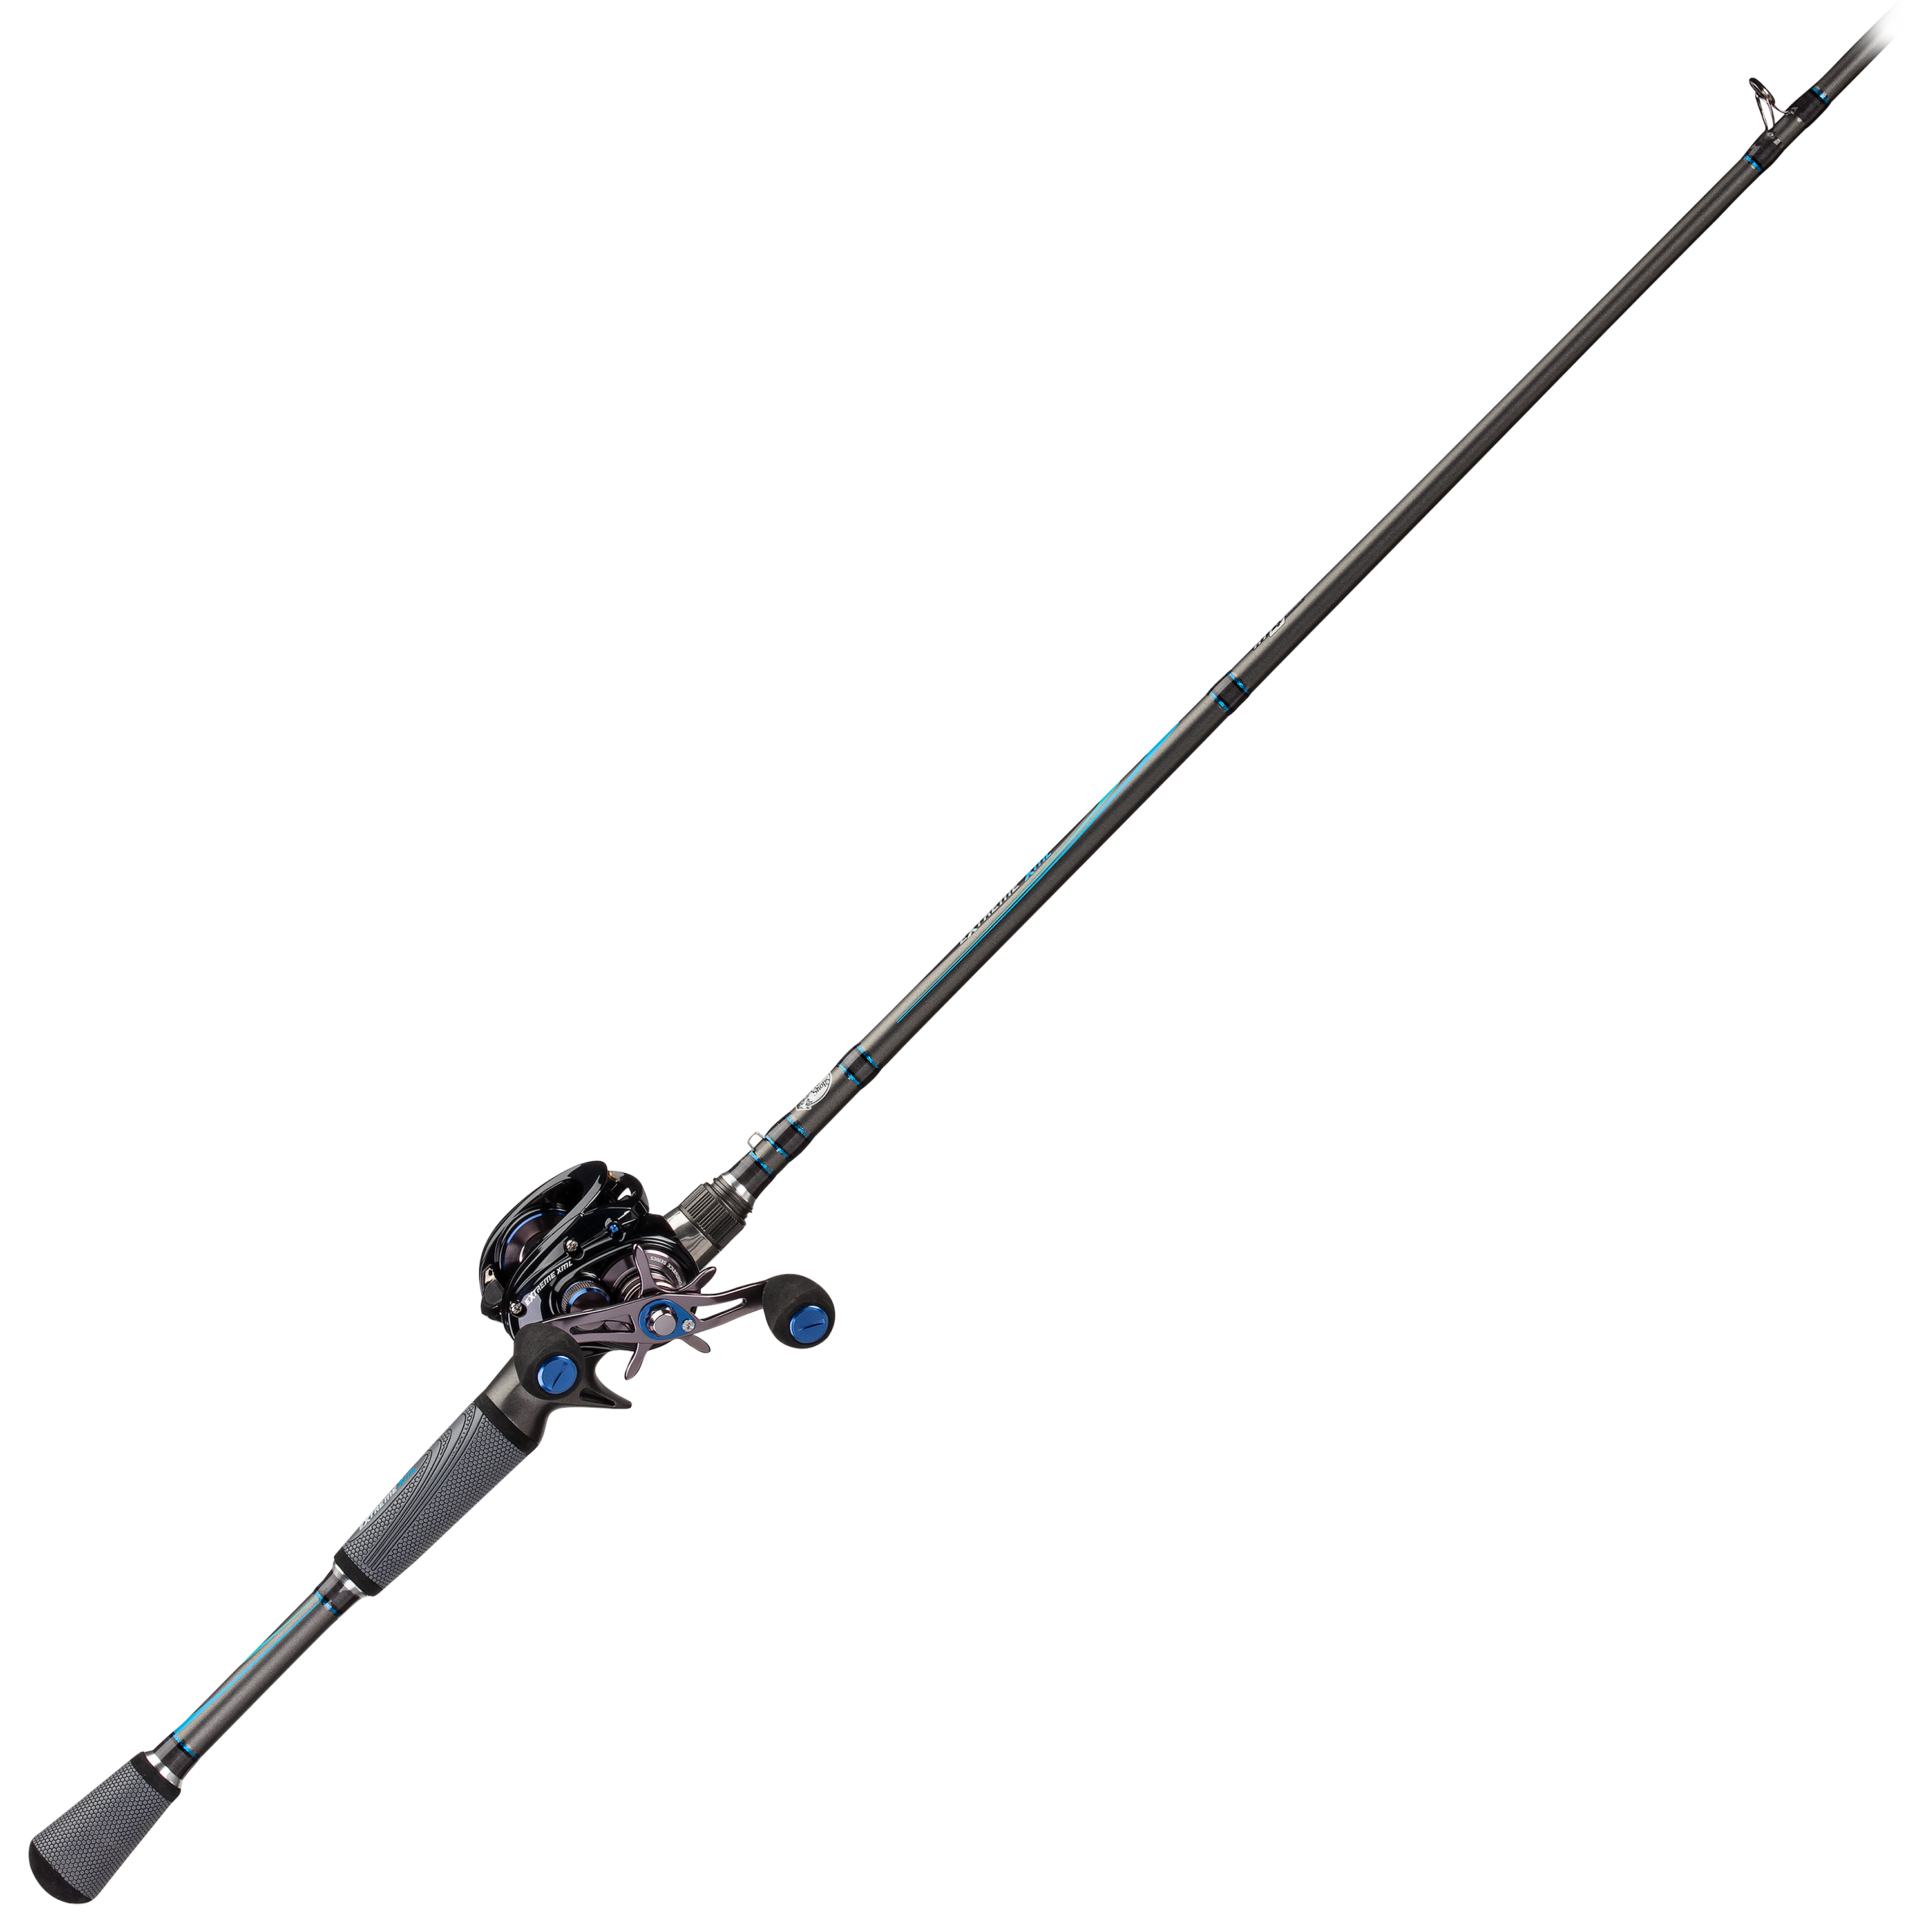 Bass Pro Shops Extreme XML Baitcast Combo - Right - 7' - Med - Teal/Blue